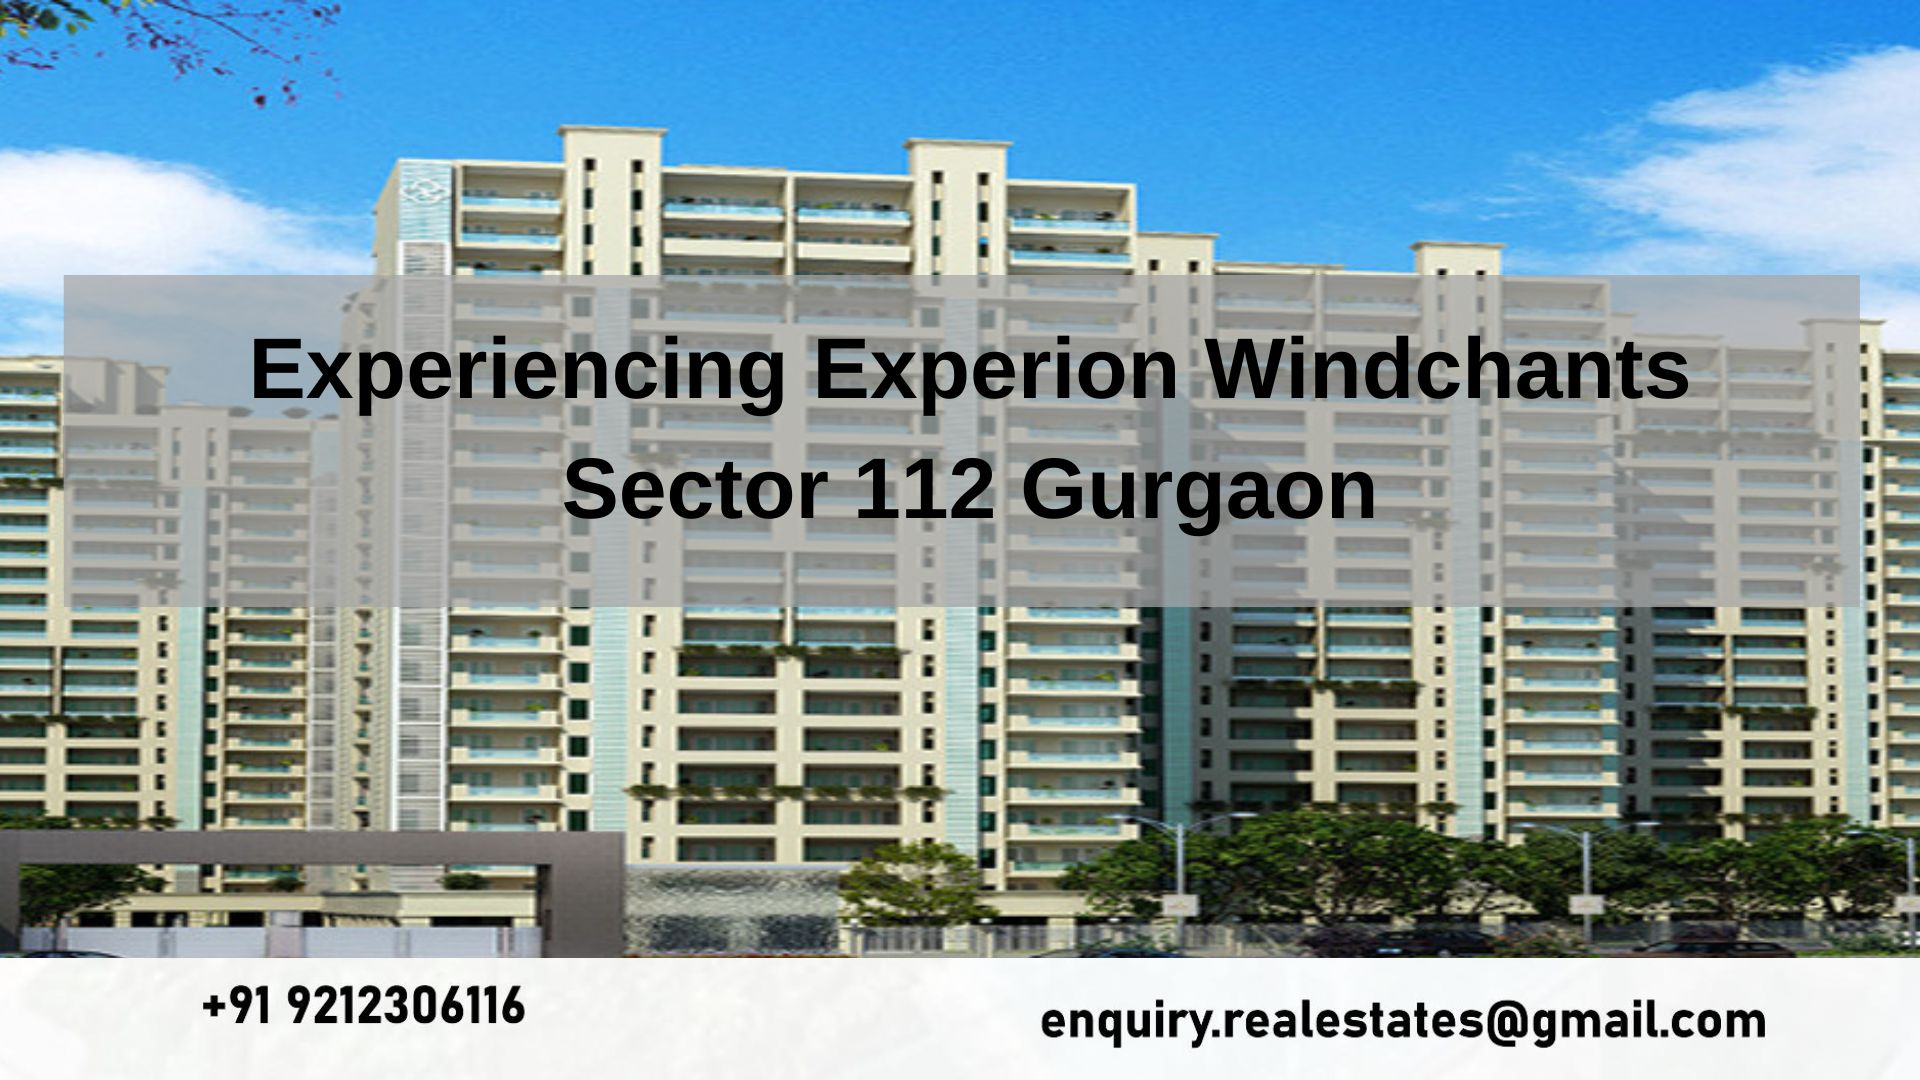 Experiencing Experion Windchants Sector 112 Gurgaon